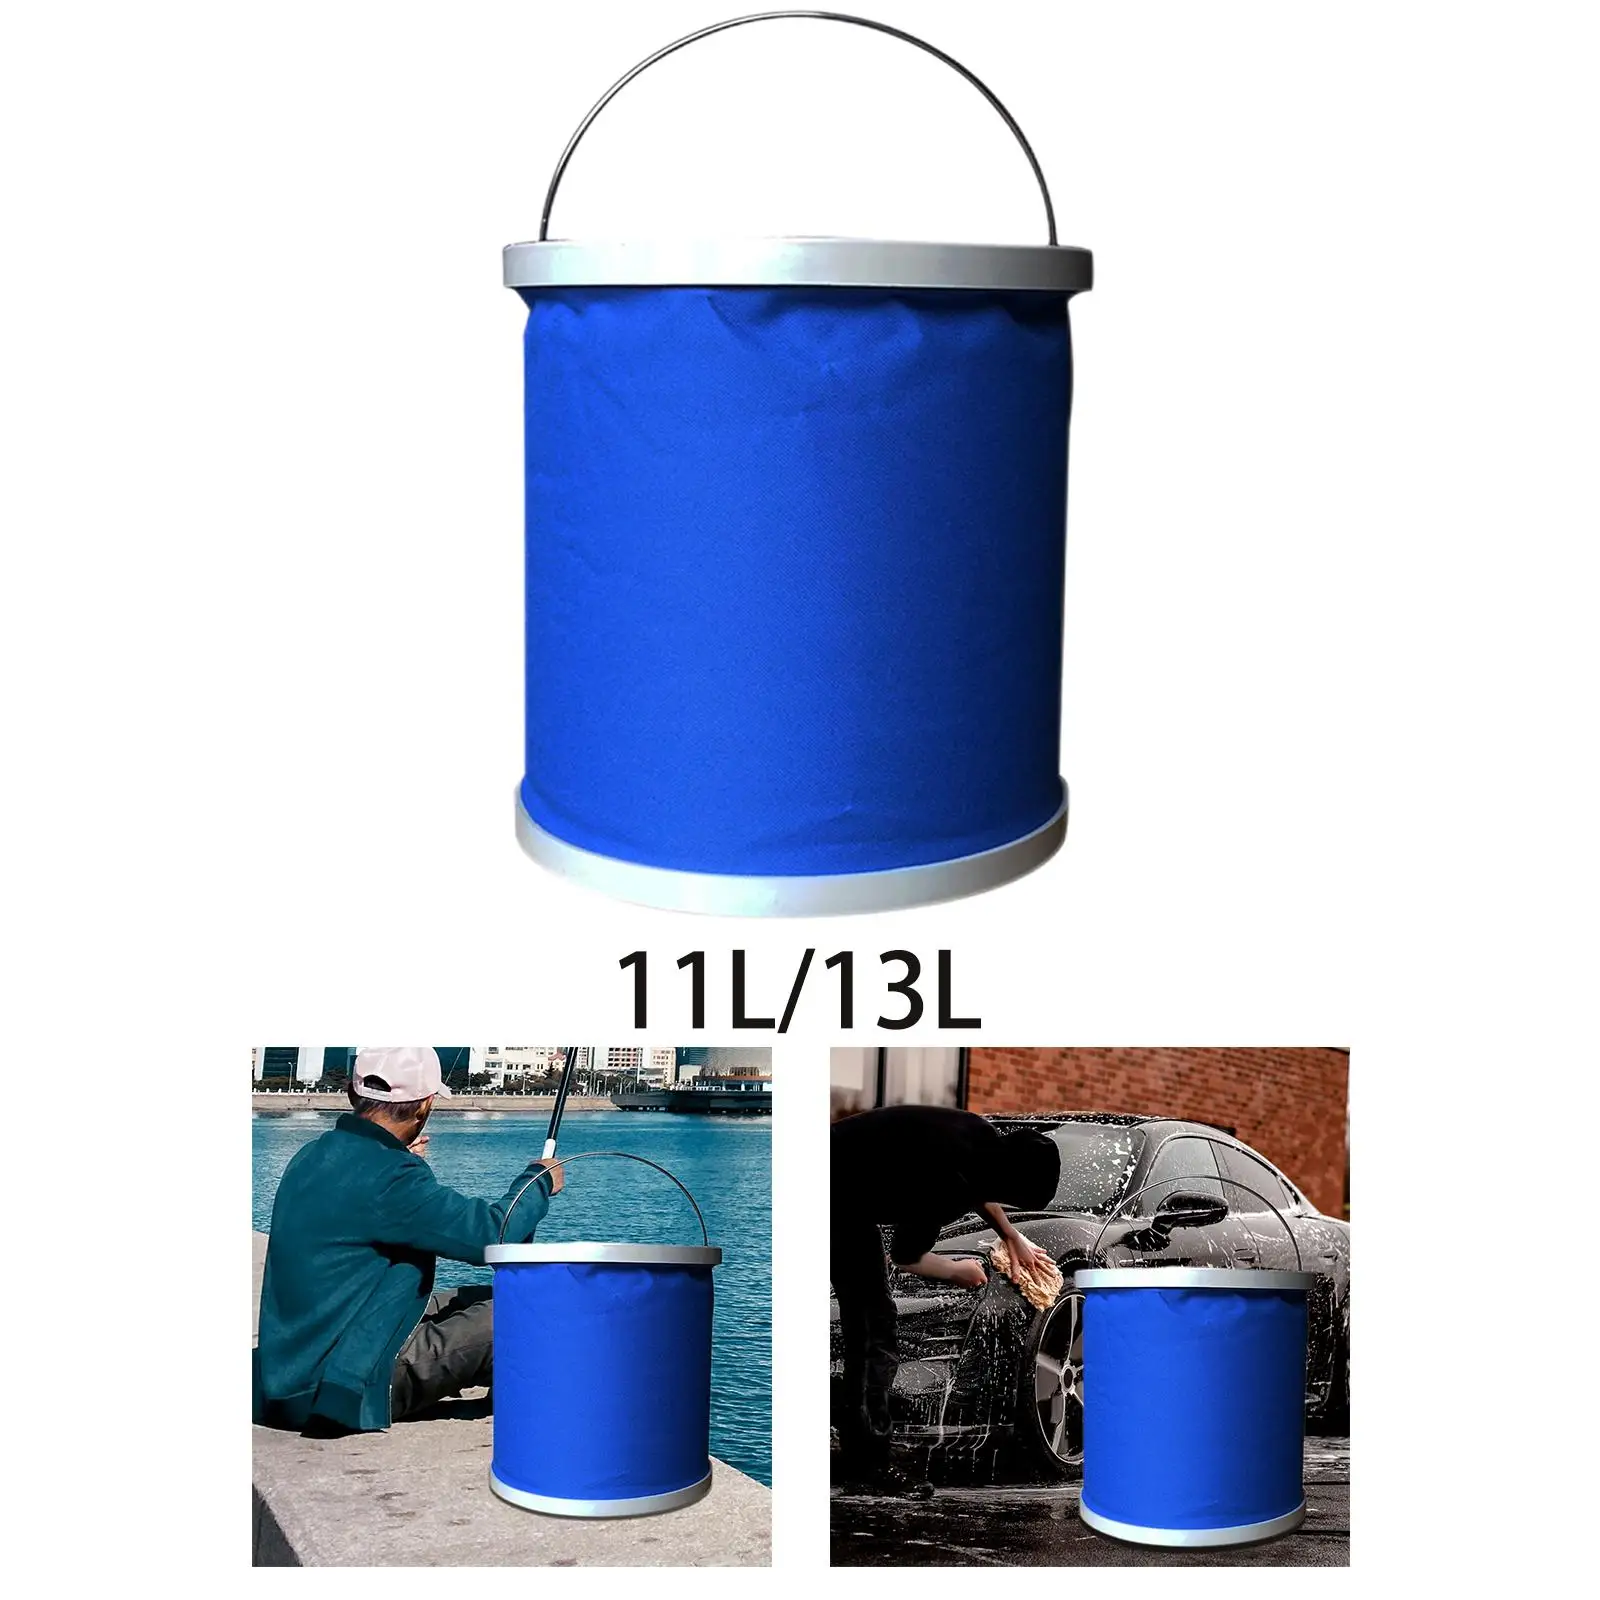 Folding Outdoor Collapsible Bucket Car Dust Bin Container Foot Bath Tub with Lid Carrier Camping for Fishing Car Washing Picnic